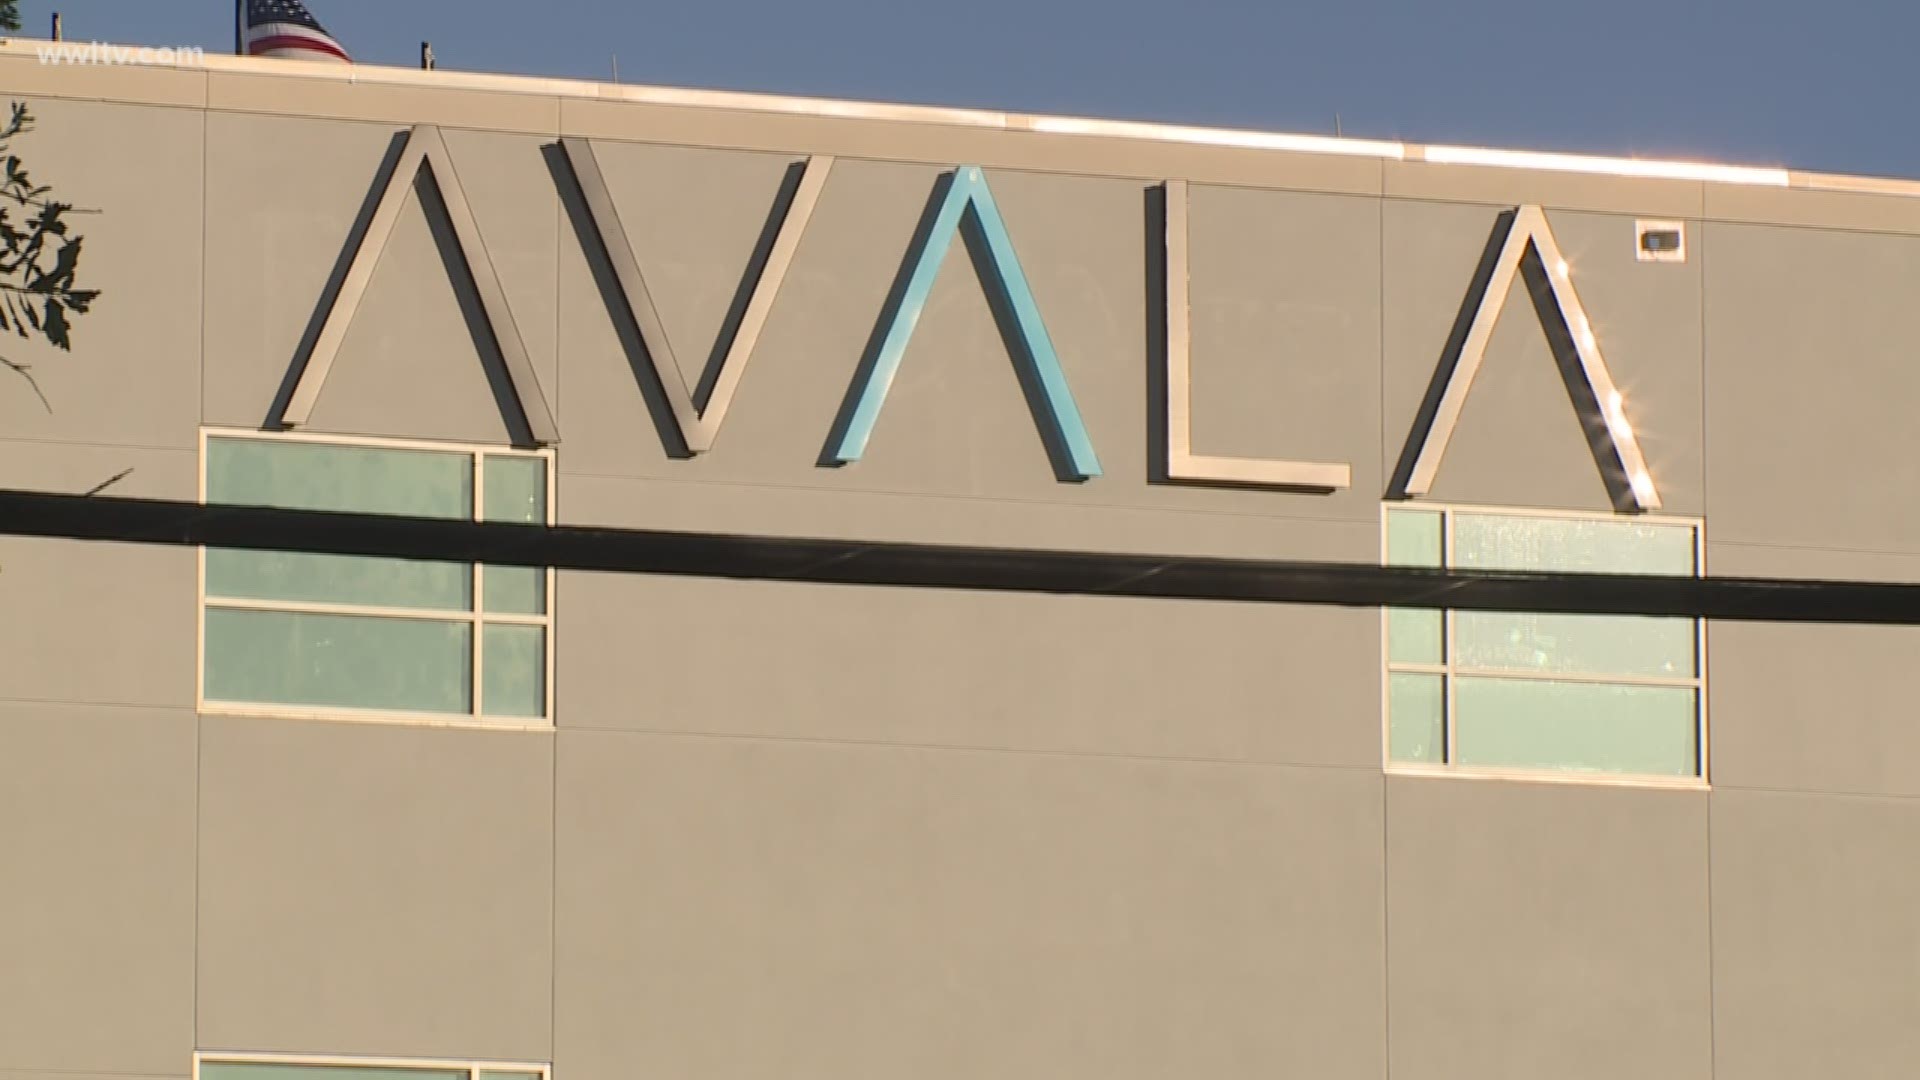 Doctors say Avala, located on Industry Lane in Covington, is the only hospital in the region to offer robotic-assisted spine and orthopedic surgeries.